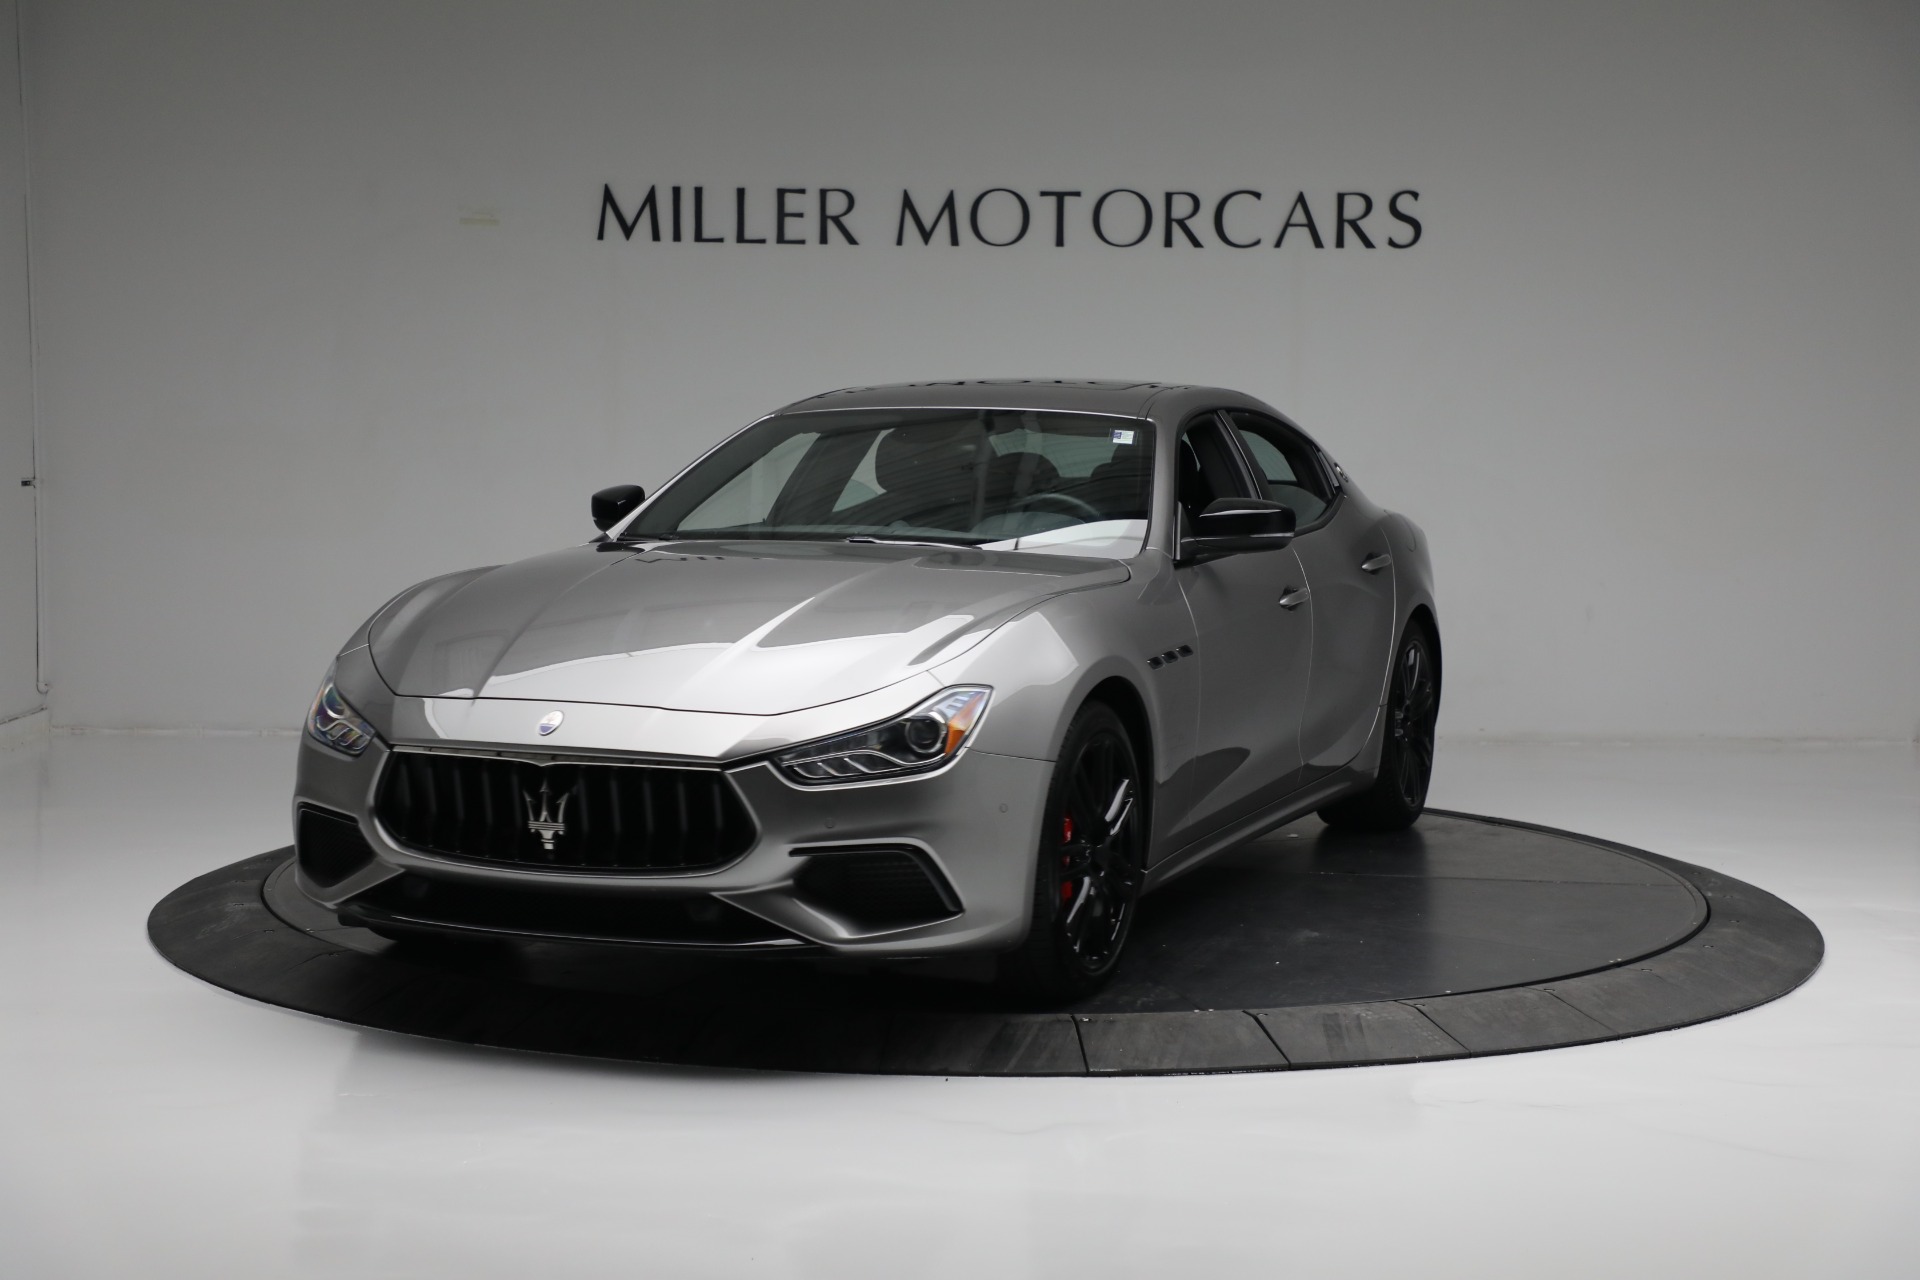 New 2021 Maserati Ghibli S Q4 for sale Sold at Pagani of Greenwich in Greenwich CT 06830 1